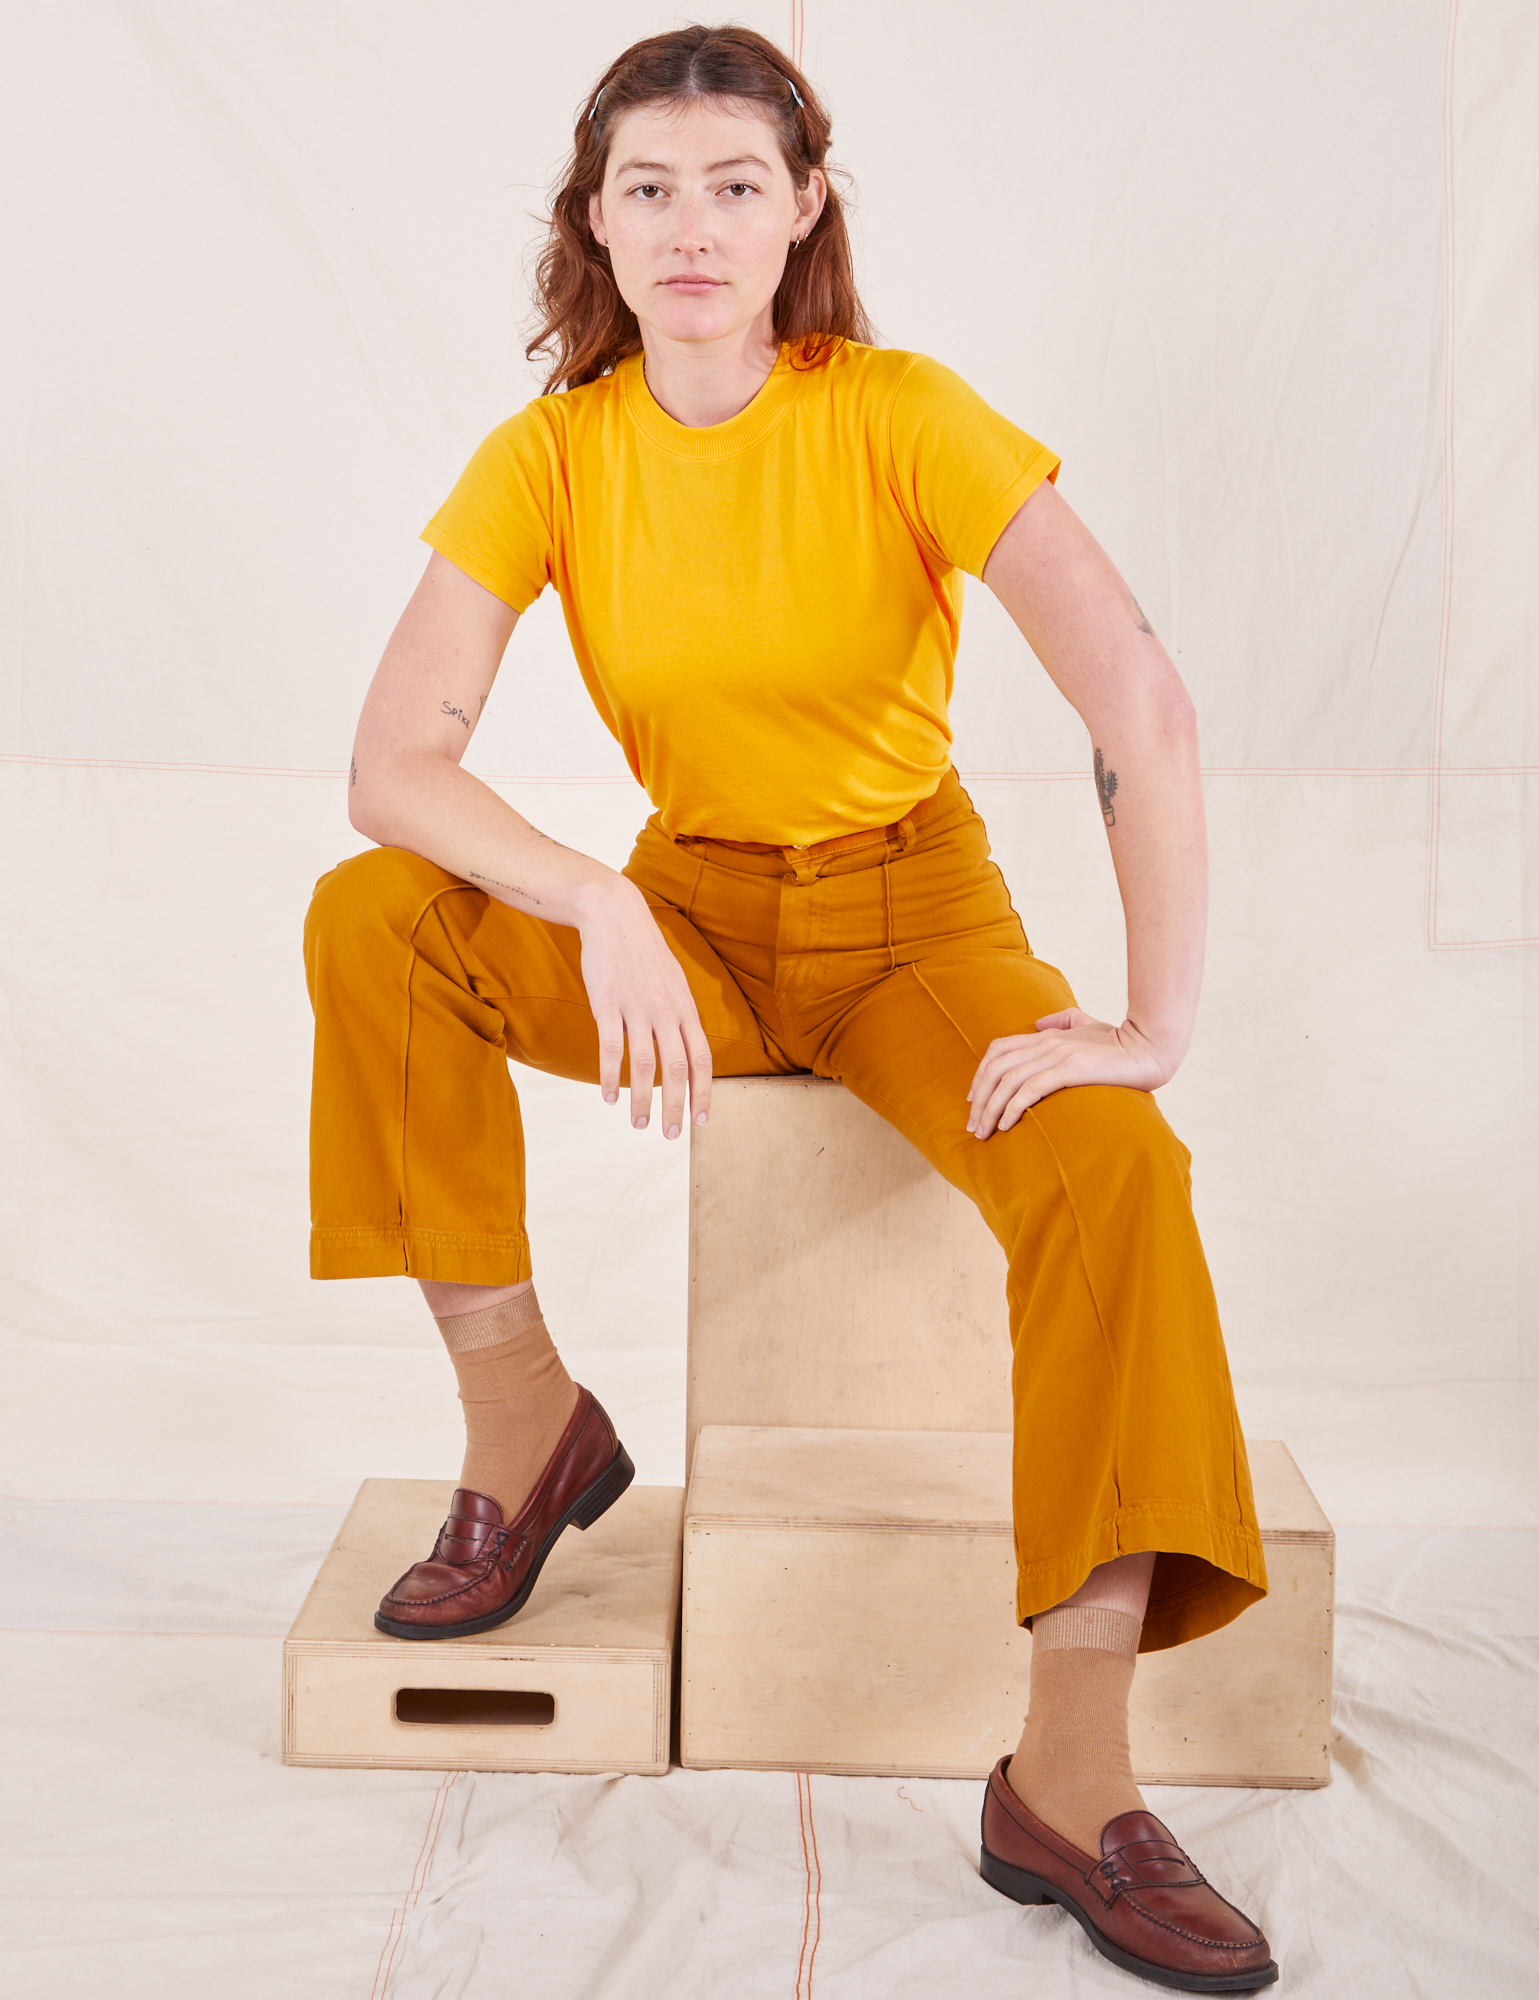 Alex is wearing Organic Vintage Tee in Sunshine Yellow and spicy mustard Western Pants